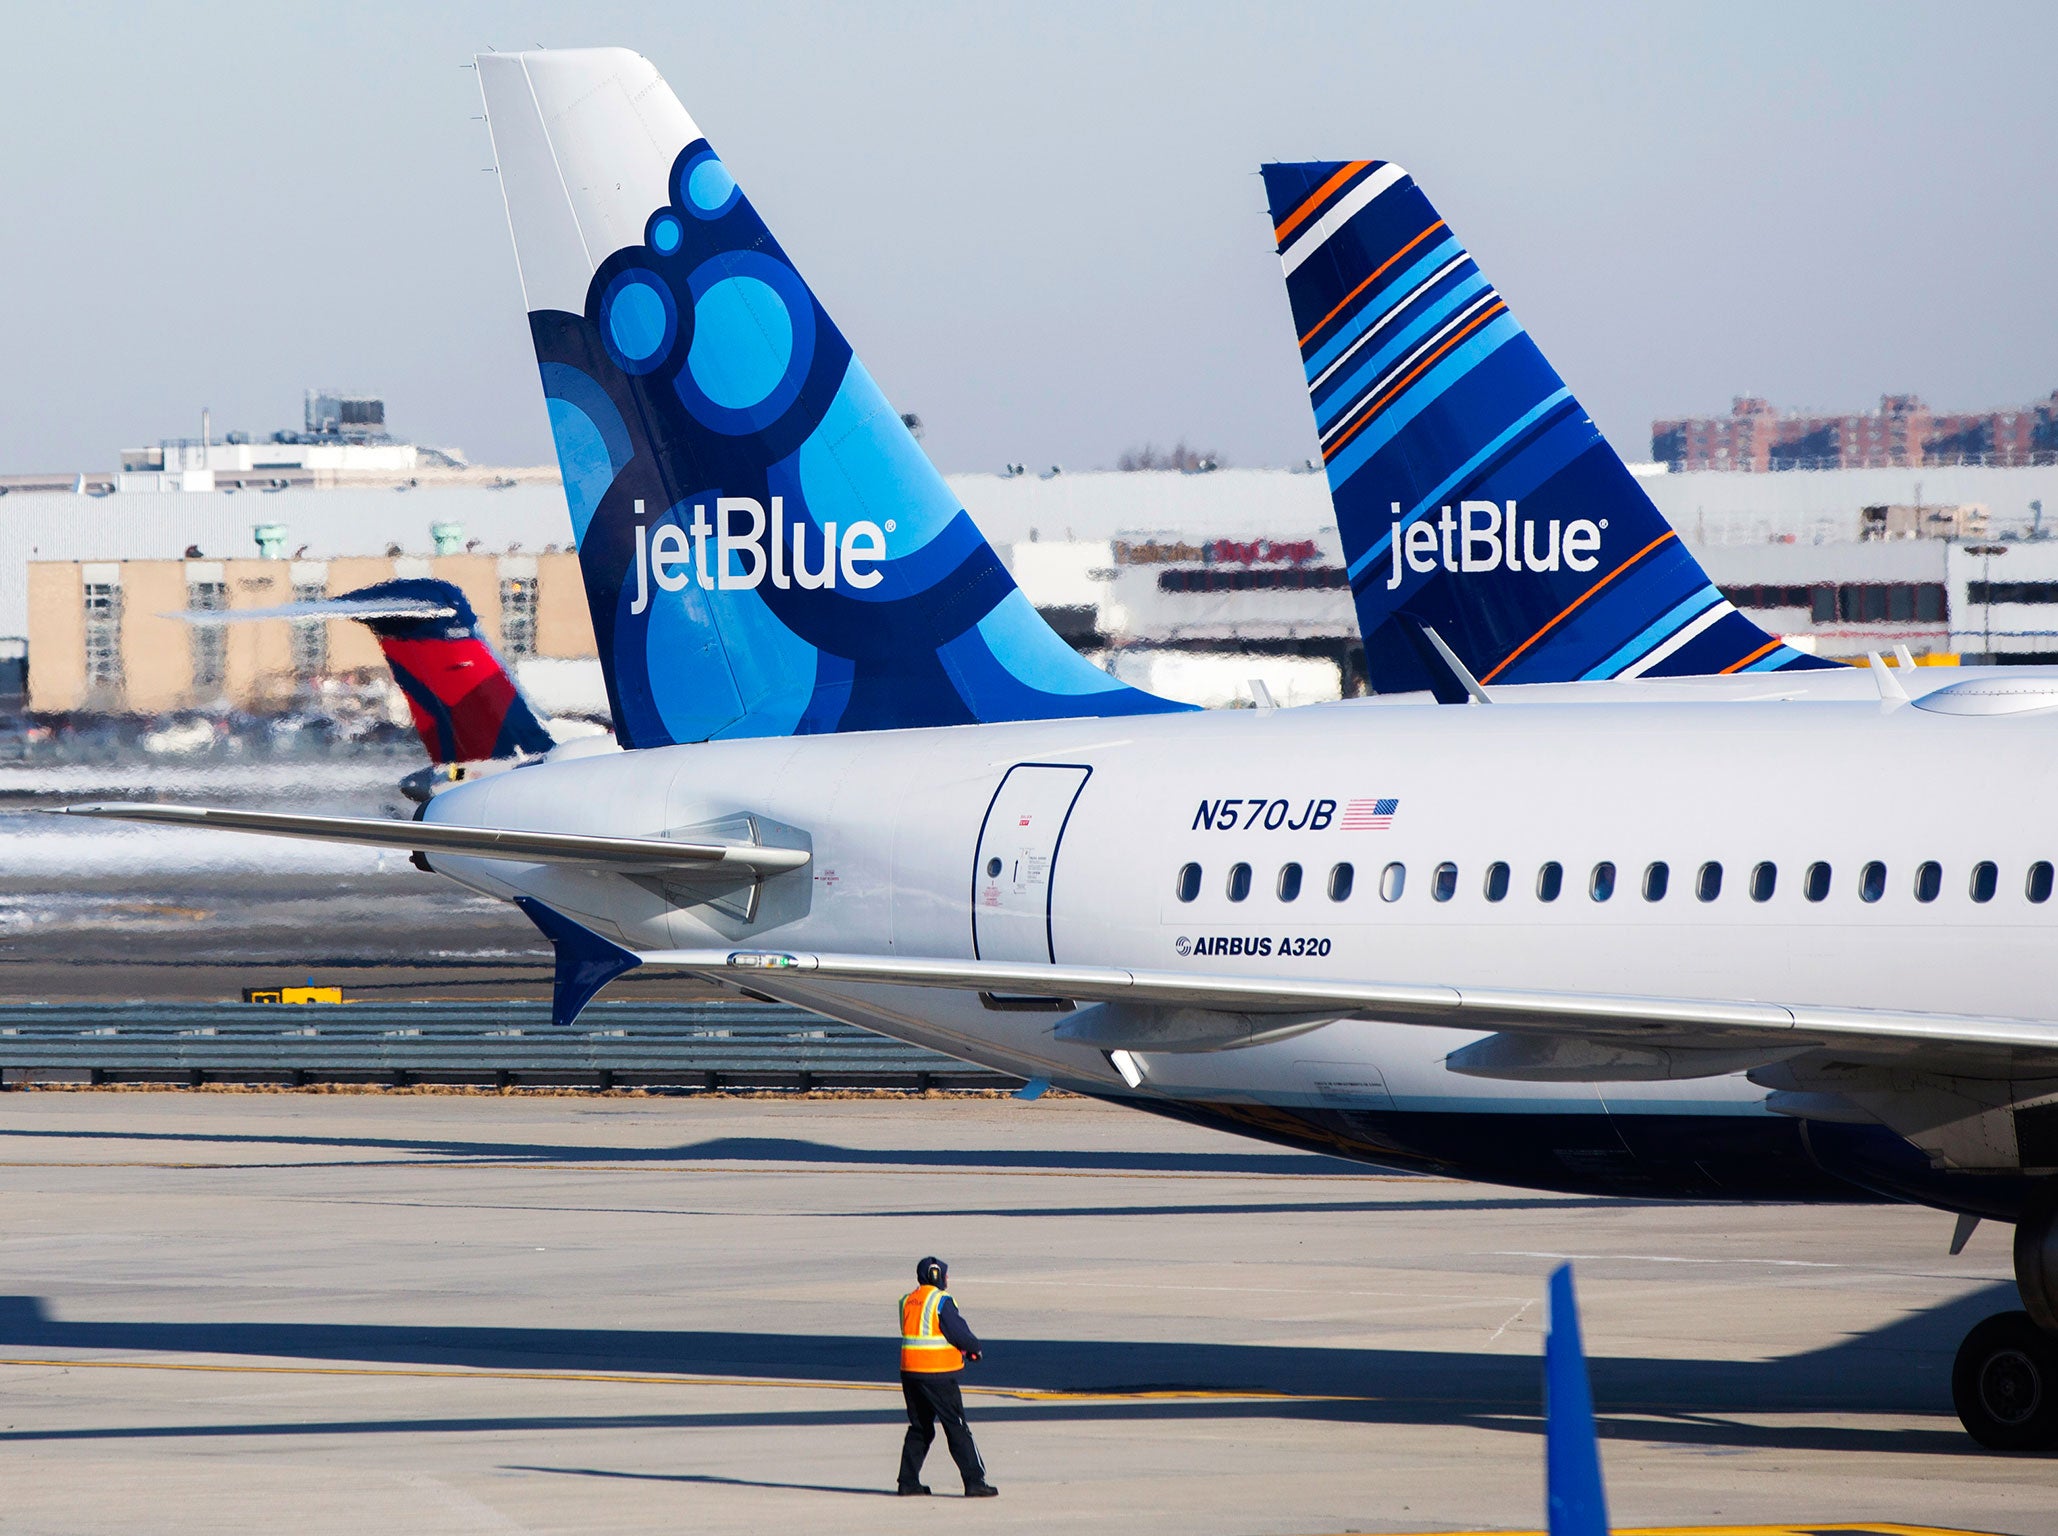 A JetBlue flight was forced to land in South Dakota after being buffeted by turbulence